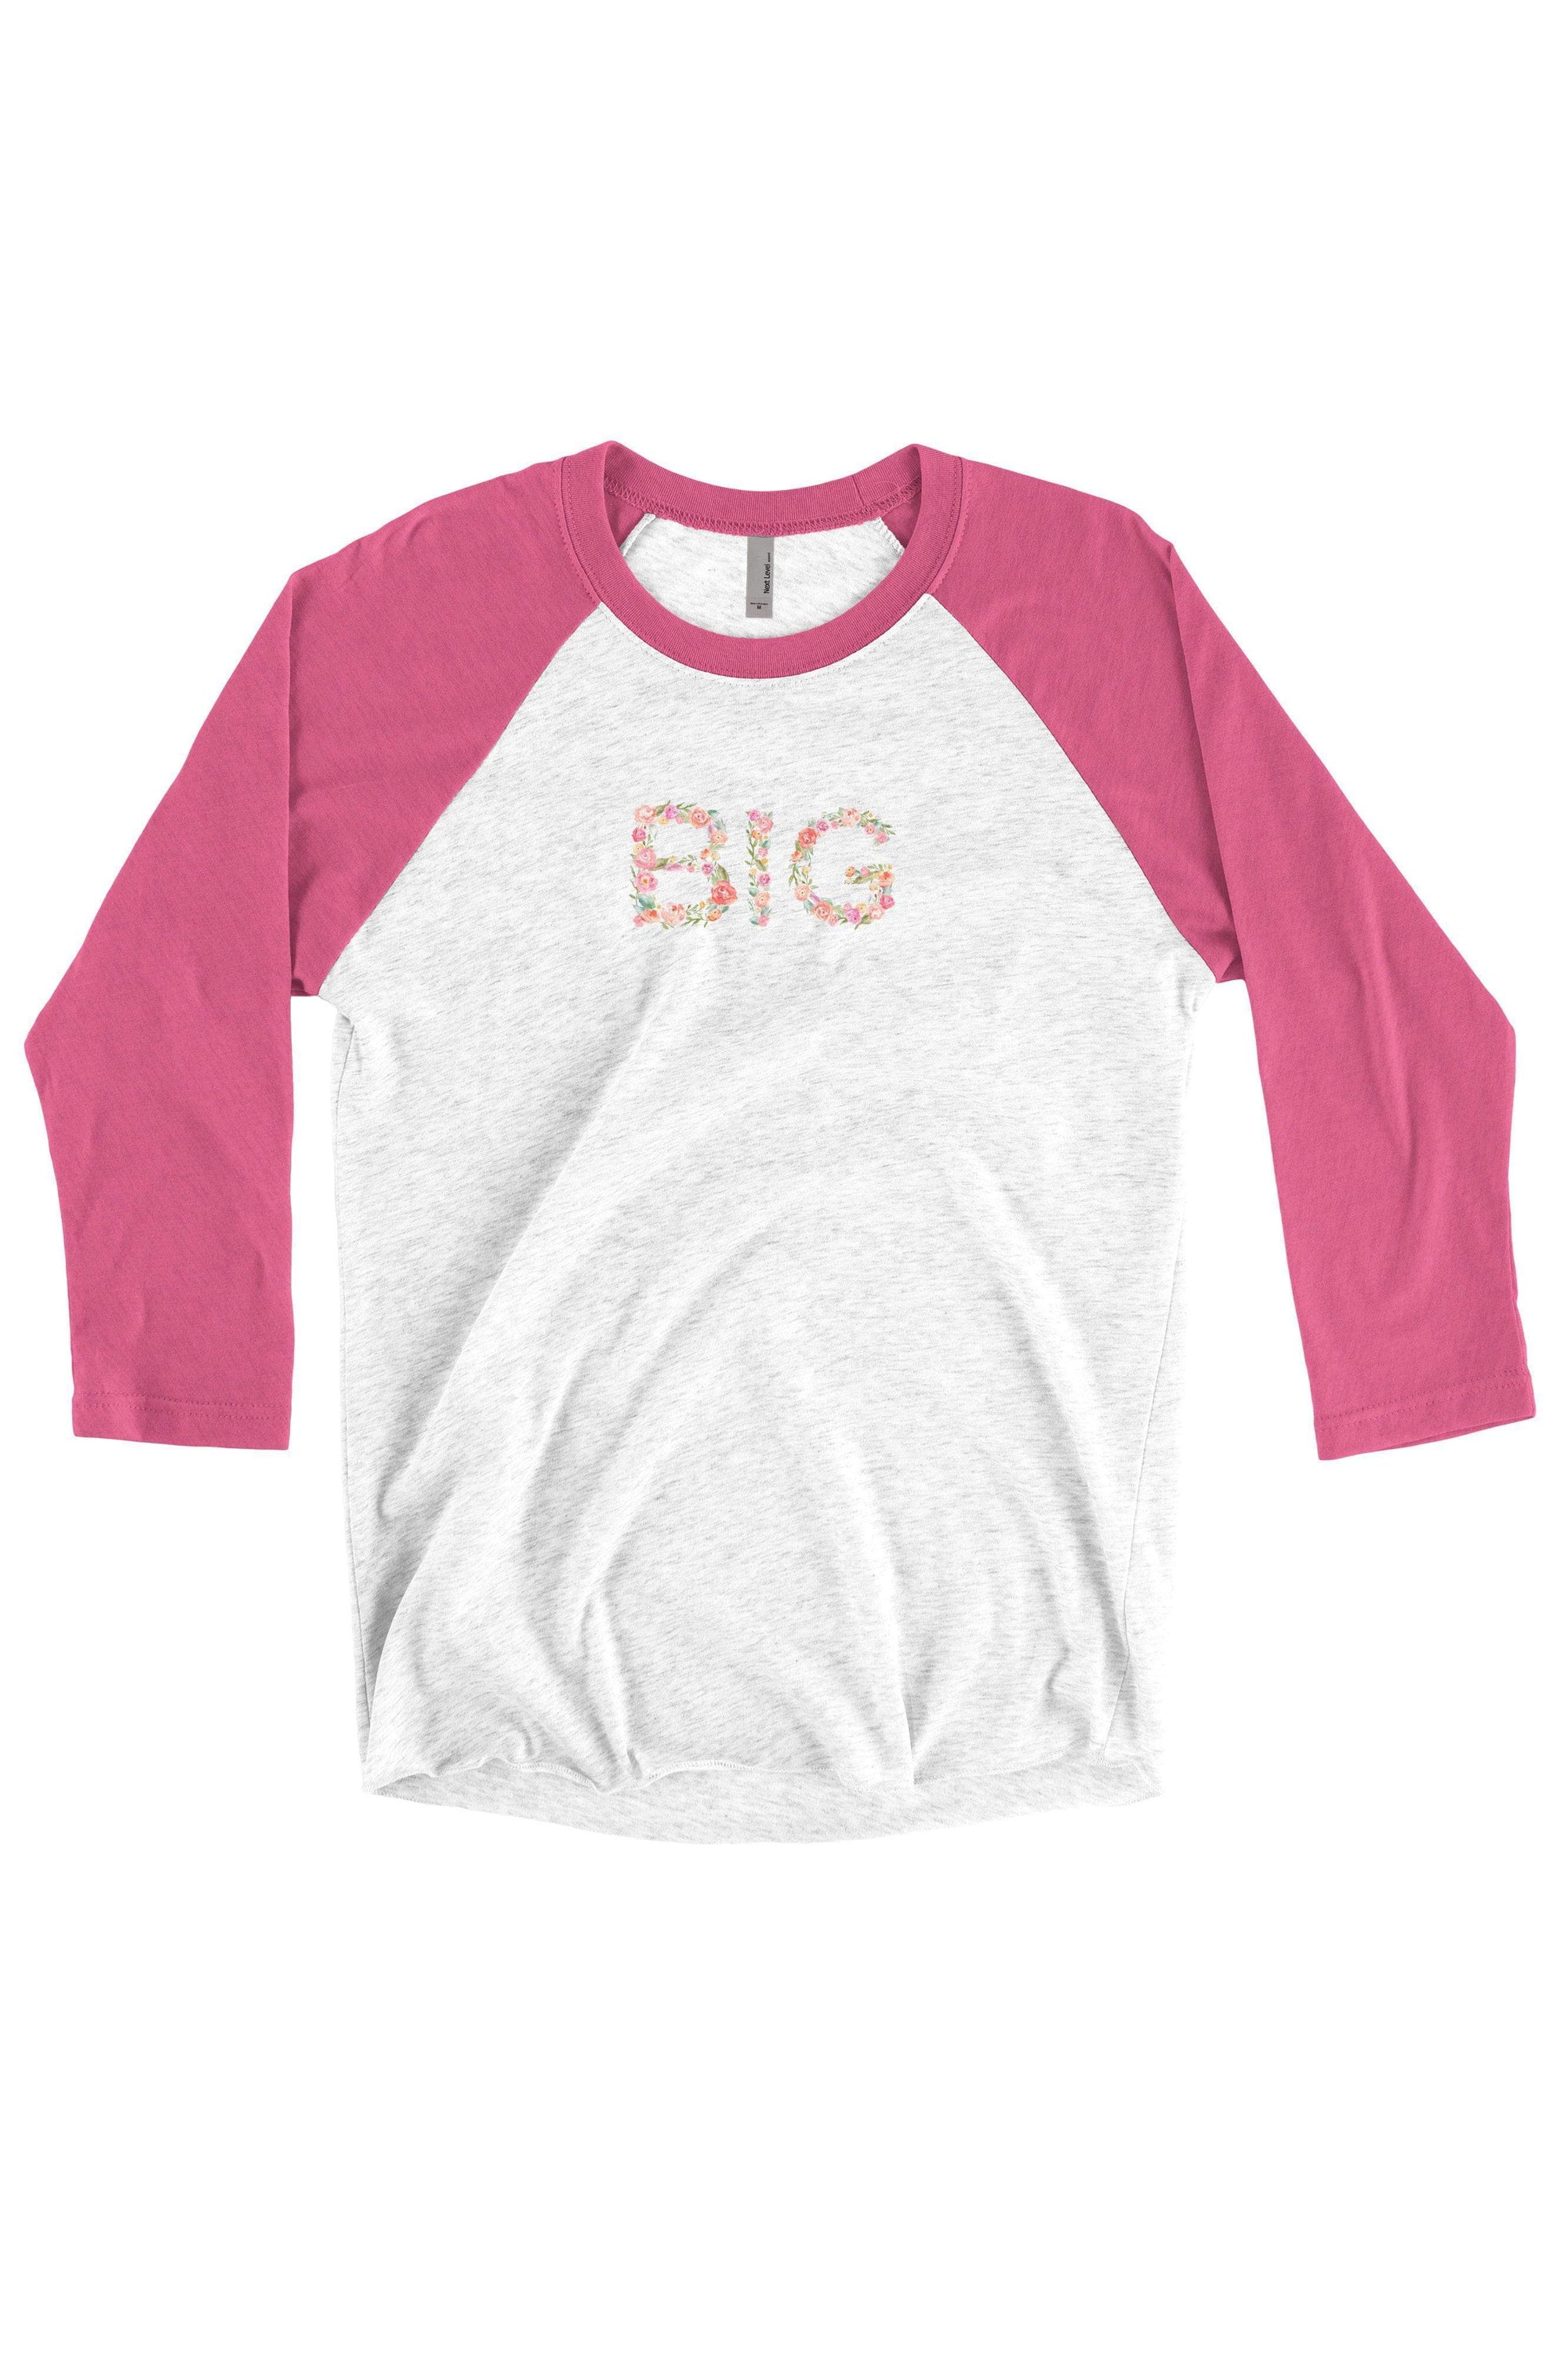 Big Little Floral Letters Shirt - Next Level Unisex Triblend 3/4-Sleeve Raglan, Ladies, Sunny and Southern, - Sunny and Southern,